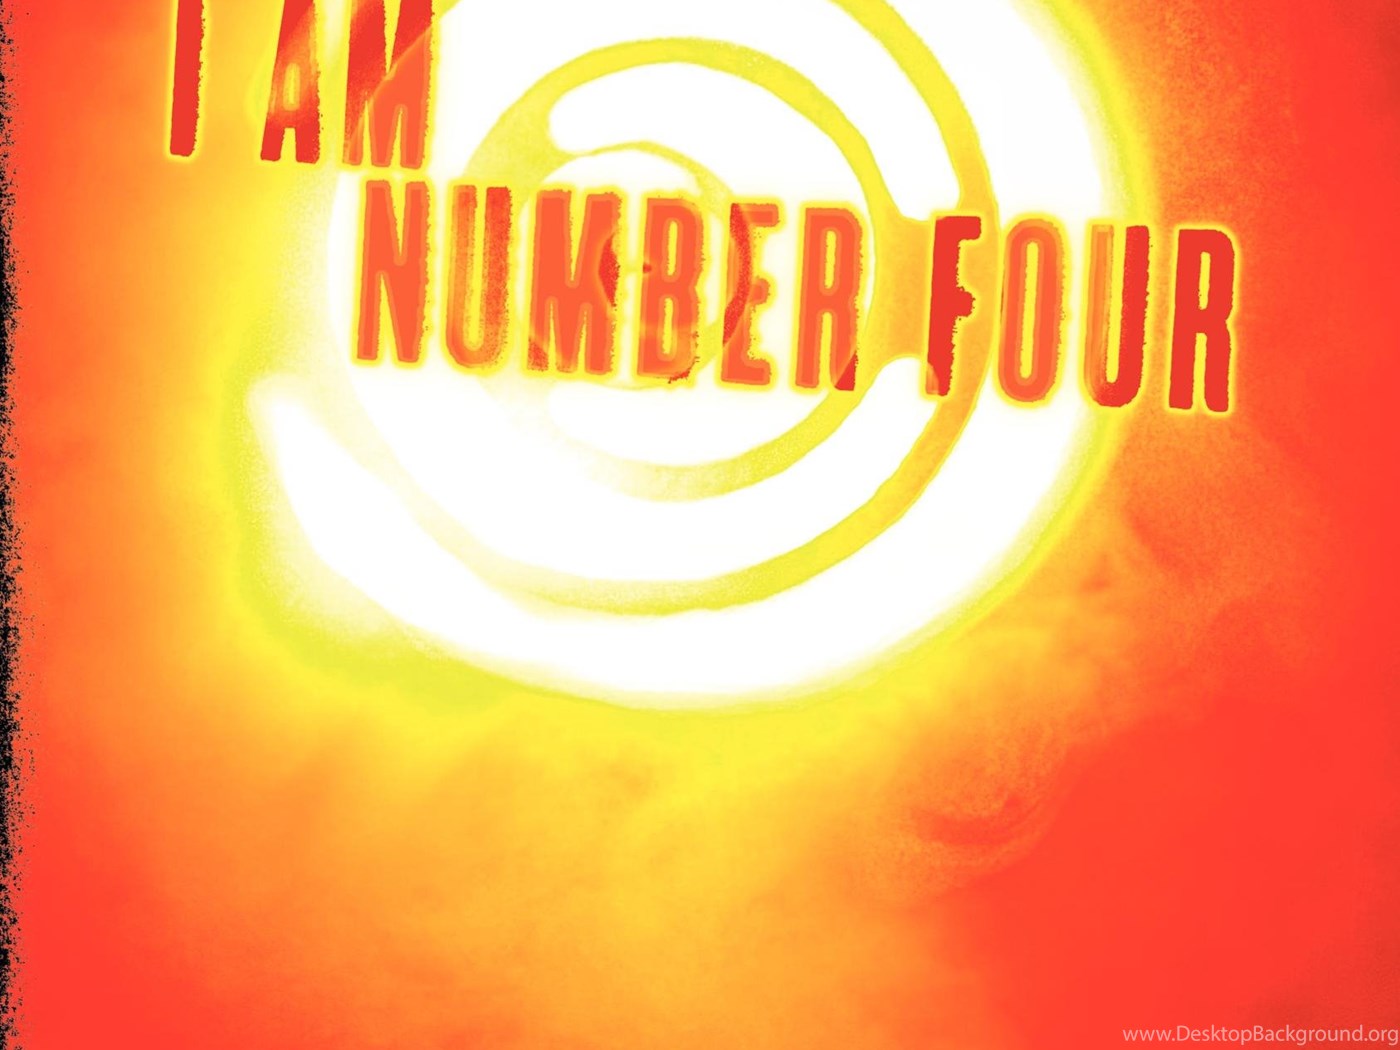 One of the four 1. Я четвертый аудиокнига. I am number four book. I am number one.